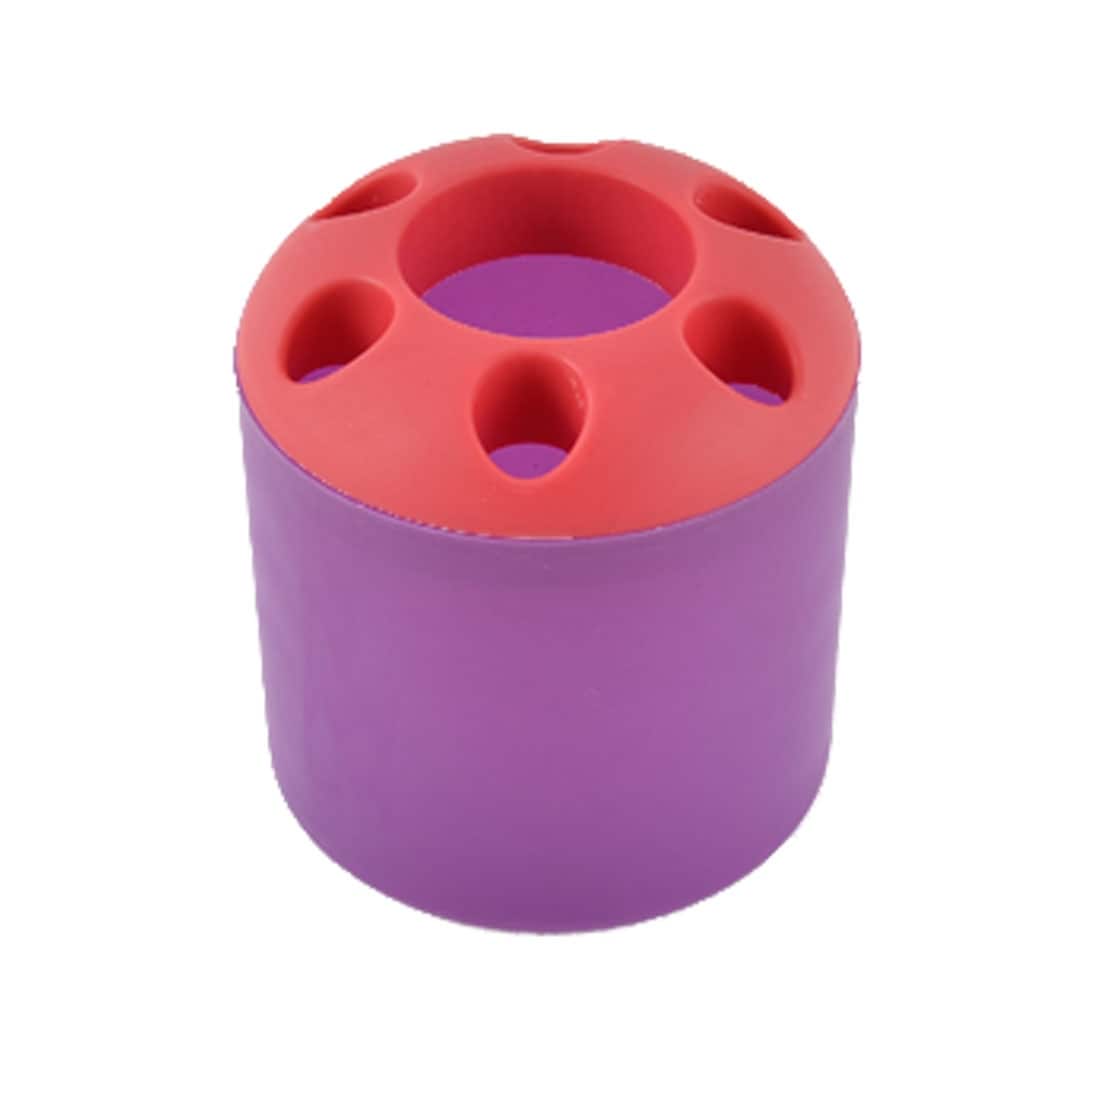 Desktop Toothbrush Toothpaste Plastic Container Organizer Holder Cup -  Purple,Red - 3.5 x 4( D*H) - Bed Bath & Beyond - 32886639